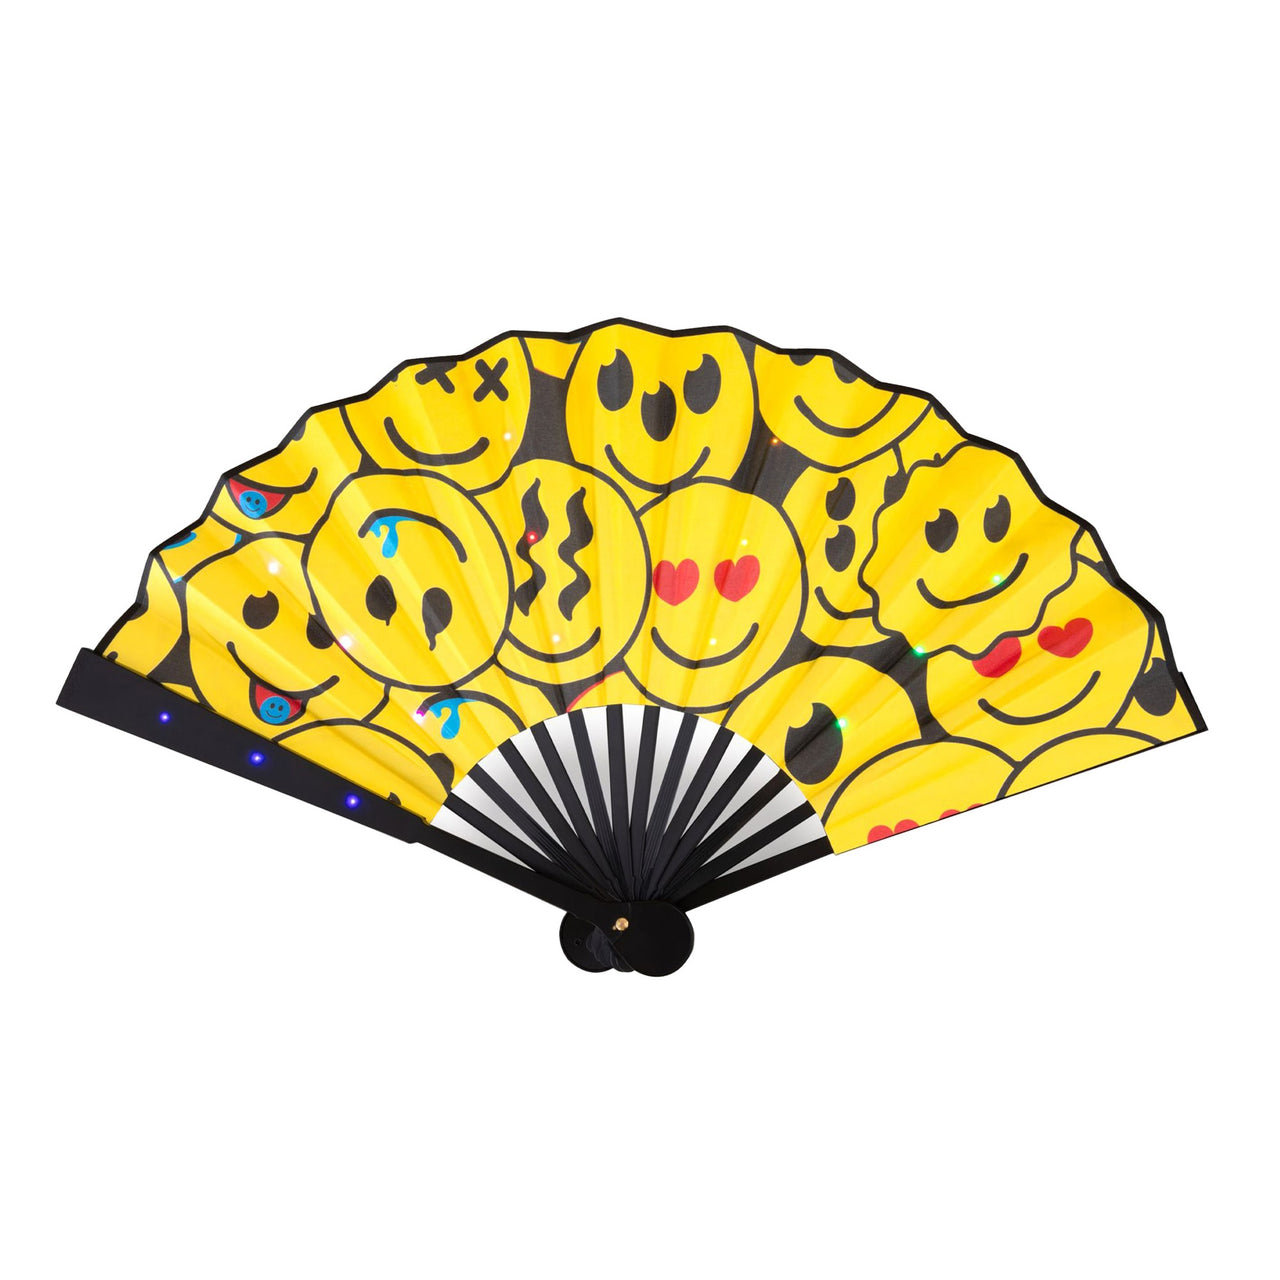 LED Hand Fan - "Be Happy" -  Don't Worry, Be Happy... With Our Smiley Emoji LED Hand Fan - Foldable for Easy Portability